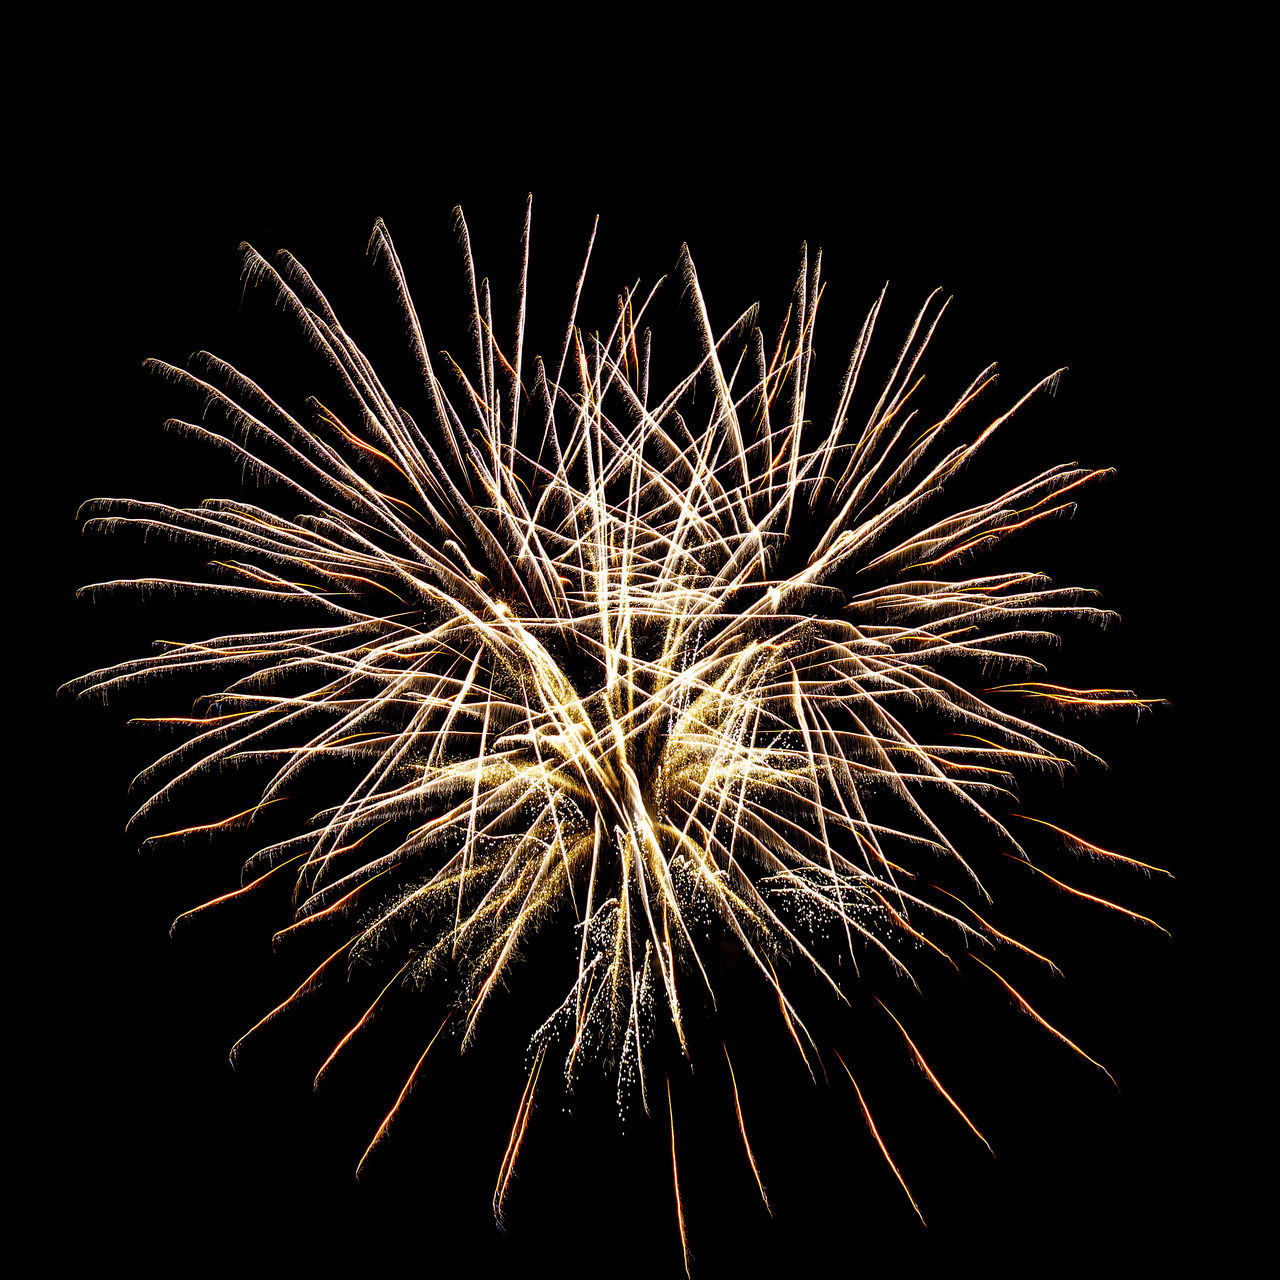 fireworks, celebration, motion, event, night, exploding, firework display, illuminated, arts culture and entertainment, glowing, no people, firework - man made object, blurred motion, sky, nature, long exposure, burning, recreation, low angle view, black, multi colored, outdoors